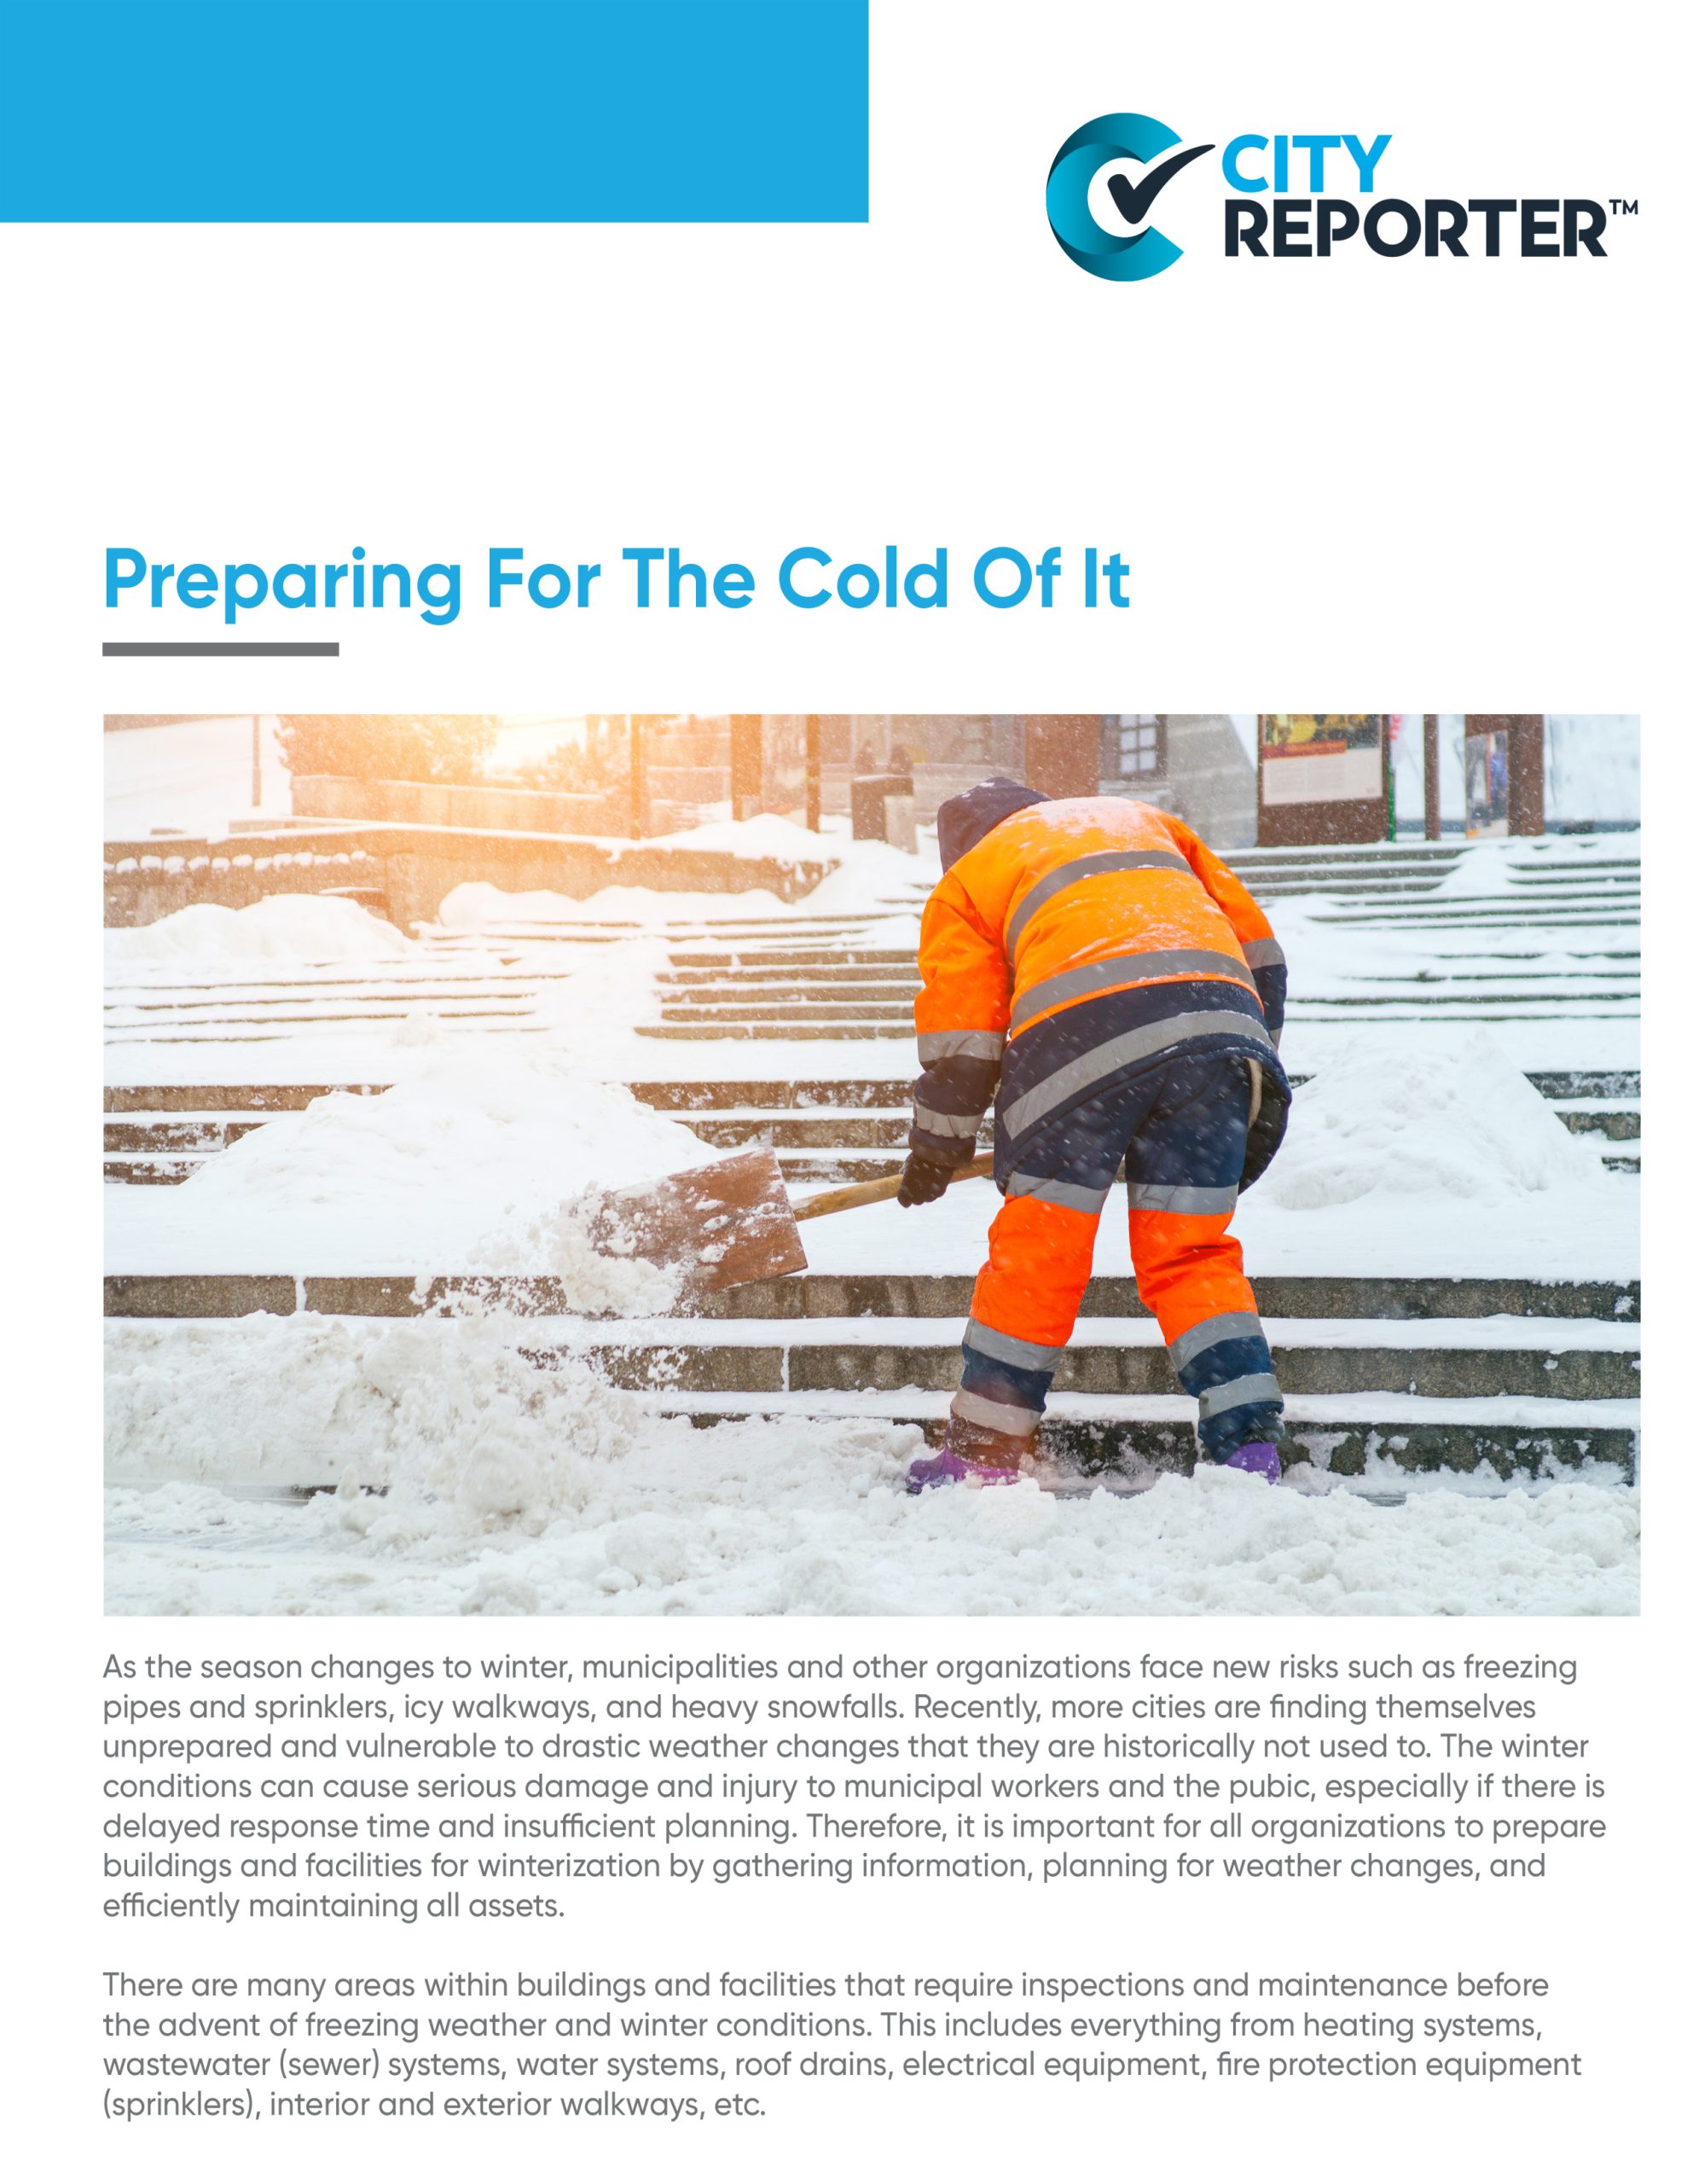 The first page of CityReporter's document - Preparing for the Cold of it